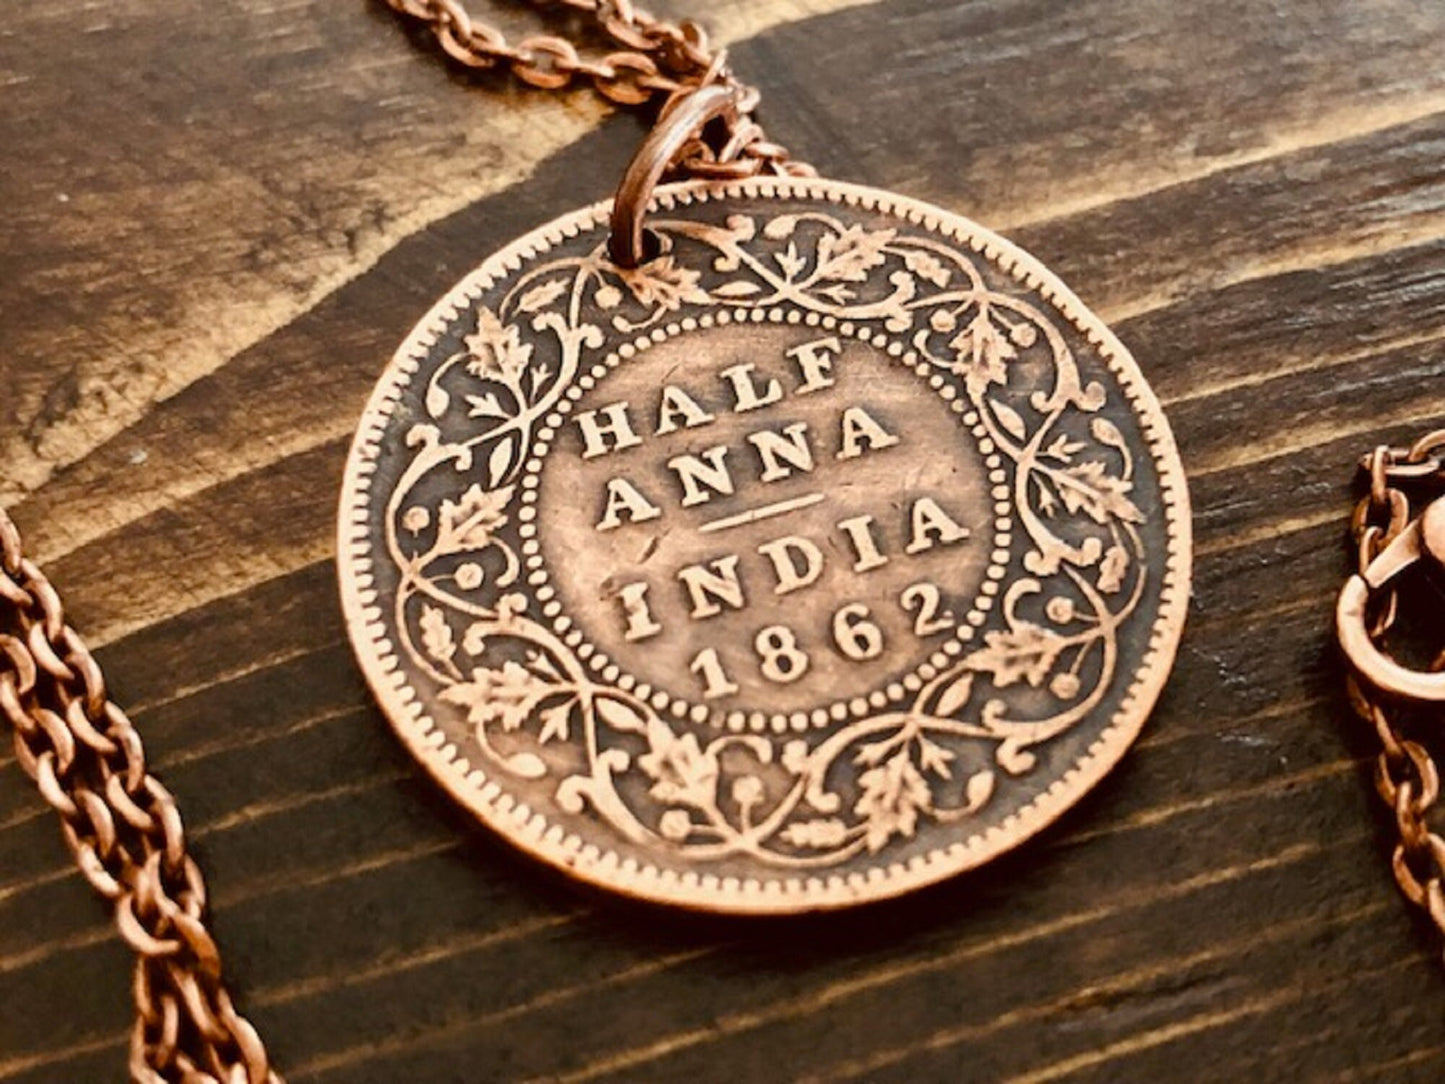 India Coin Pendant One Half Anna East Indian Personal Necklace Vintage Handmade Jewelry Gift Friend Charm For Him Her World Coin Collector